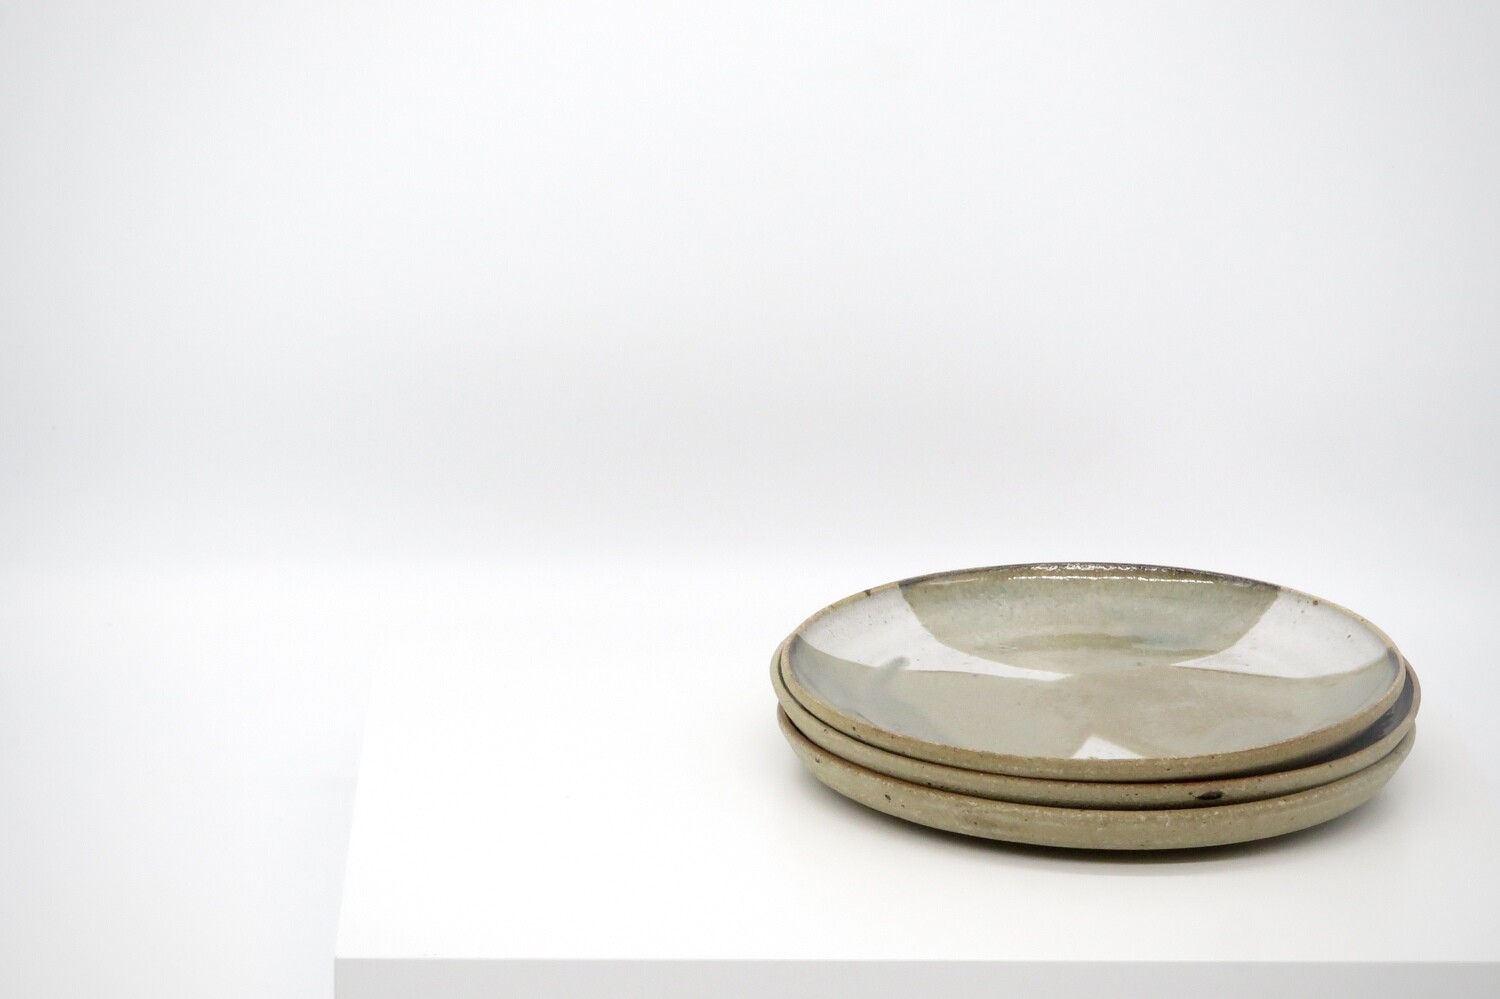 Side plate - Flecked white and mottled green.